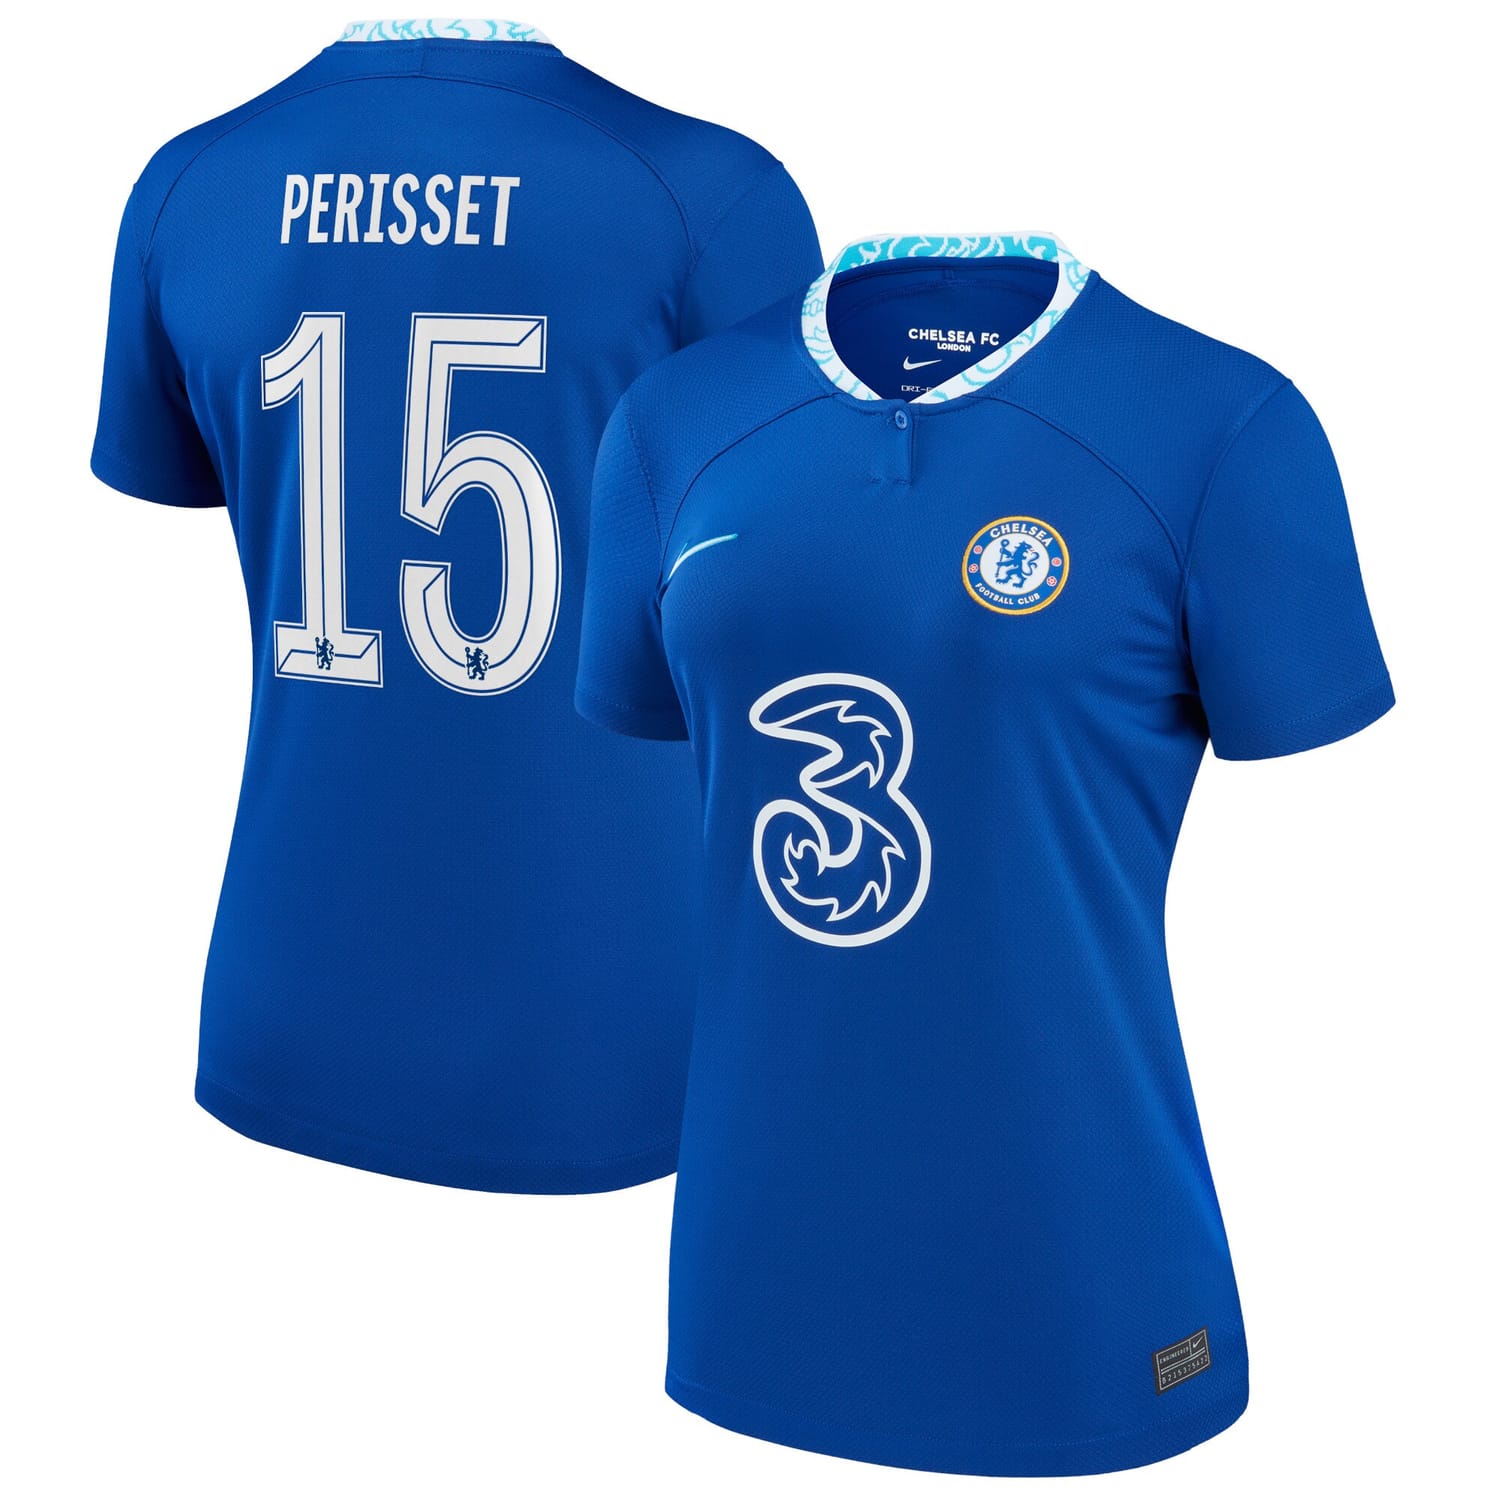 Premier League Chelsea Home Cup Jersey Shirt 2022-23 player Eve Perisset 15 printing for Women